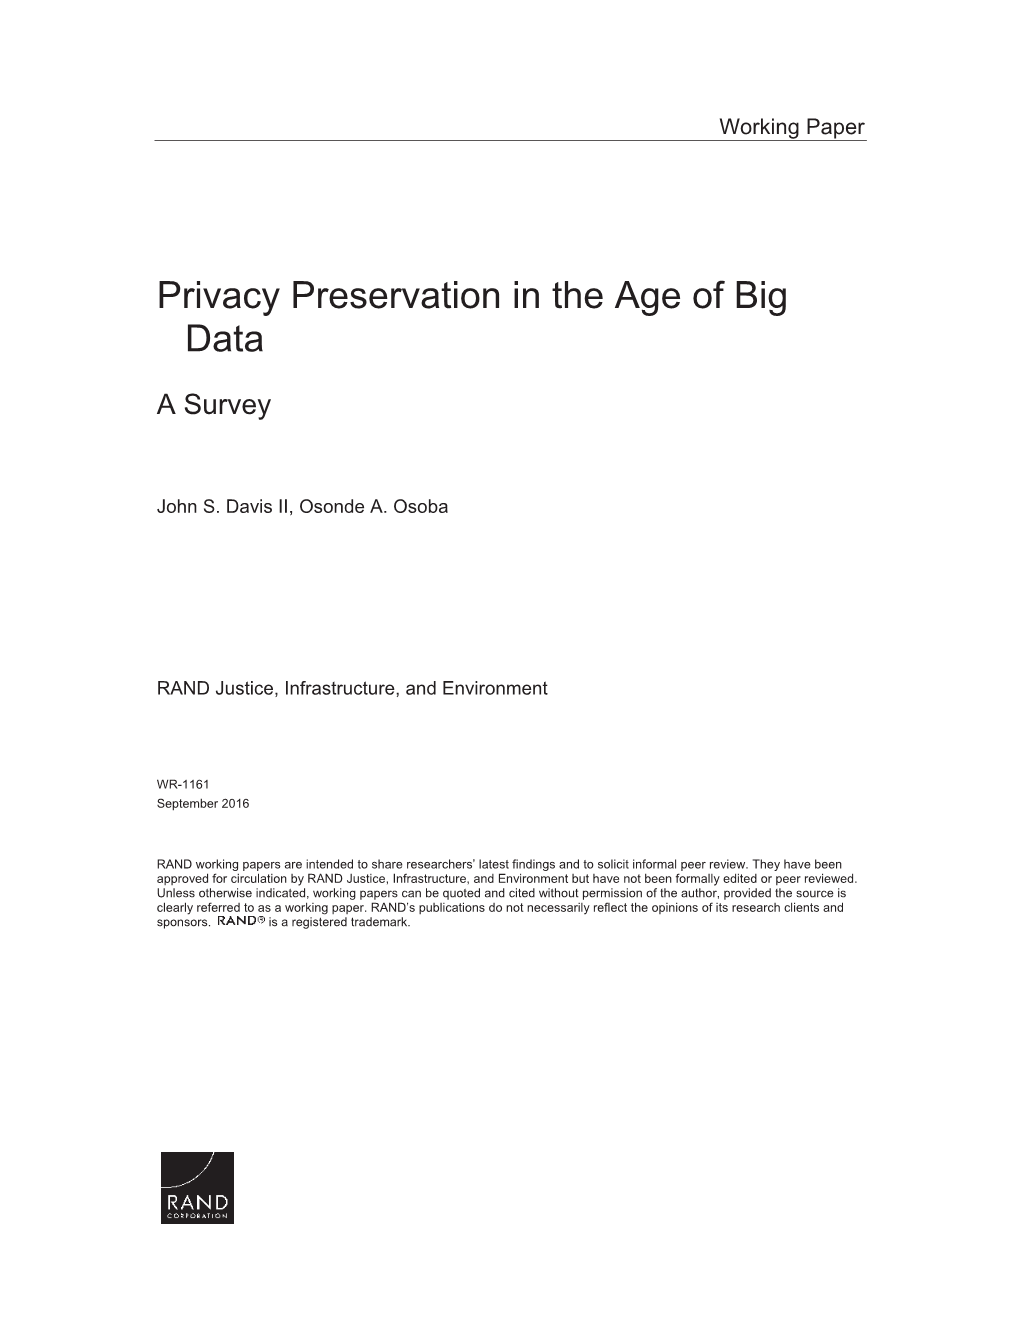 Privacy Preservation in the Age of Big Data: a Survey